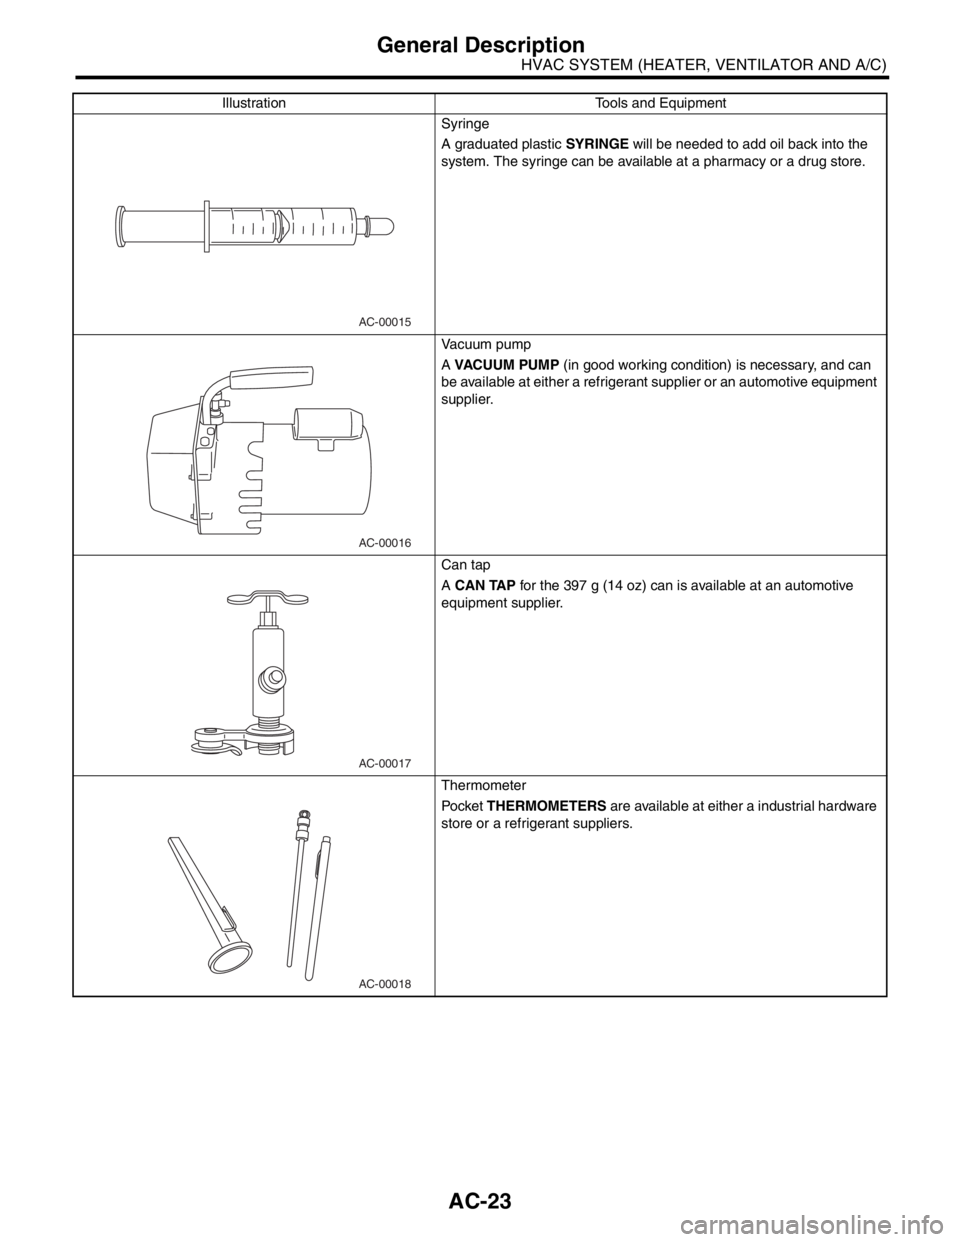 SUBARU FORESTER 2004  Service Repair Manual AC-23
HVAC SYSTEM (HEATER, VENTILATOR AND A/C)
General Description
Syringe
A graduated plastic SYRINGE will be needed to add oil back into the 
system. The syringe can be available at a pharmacy or a 